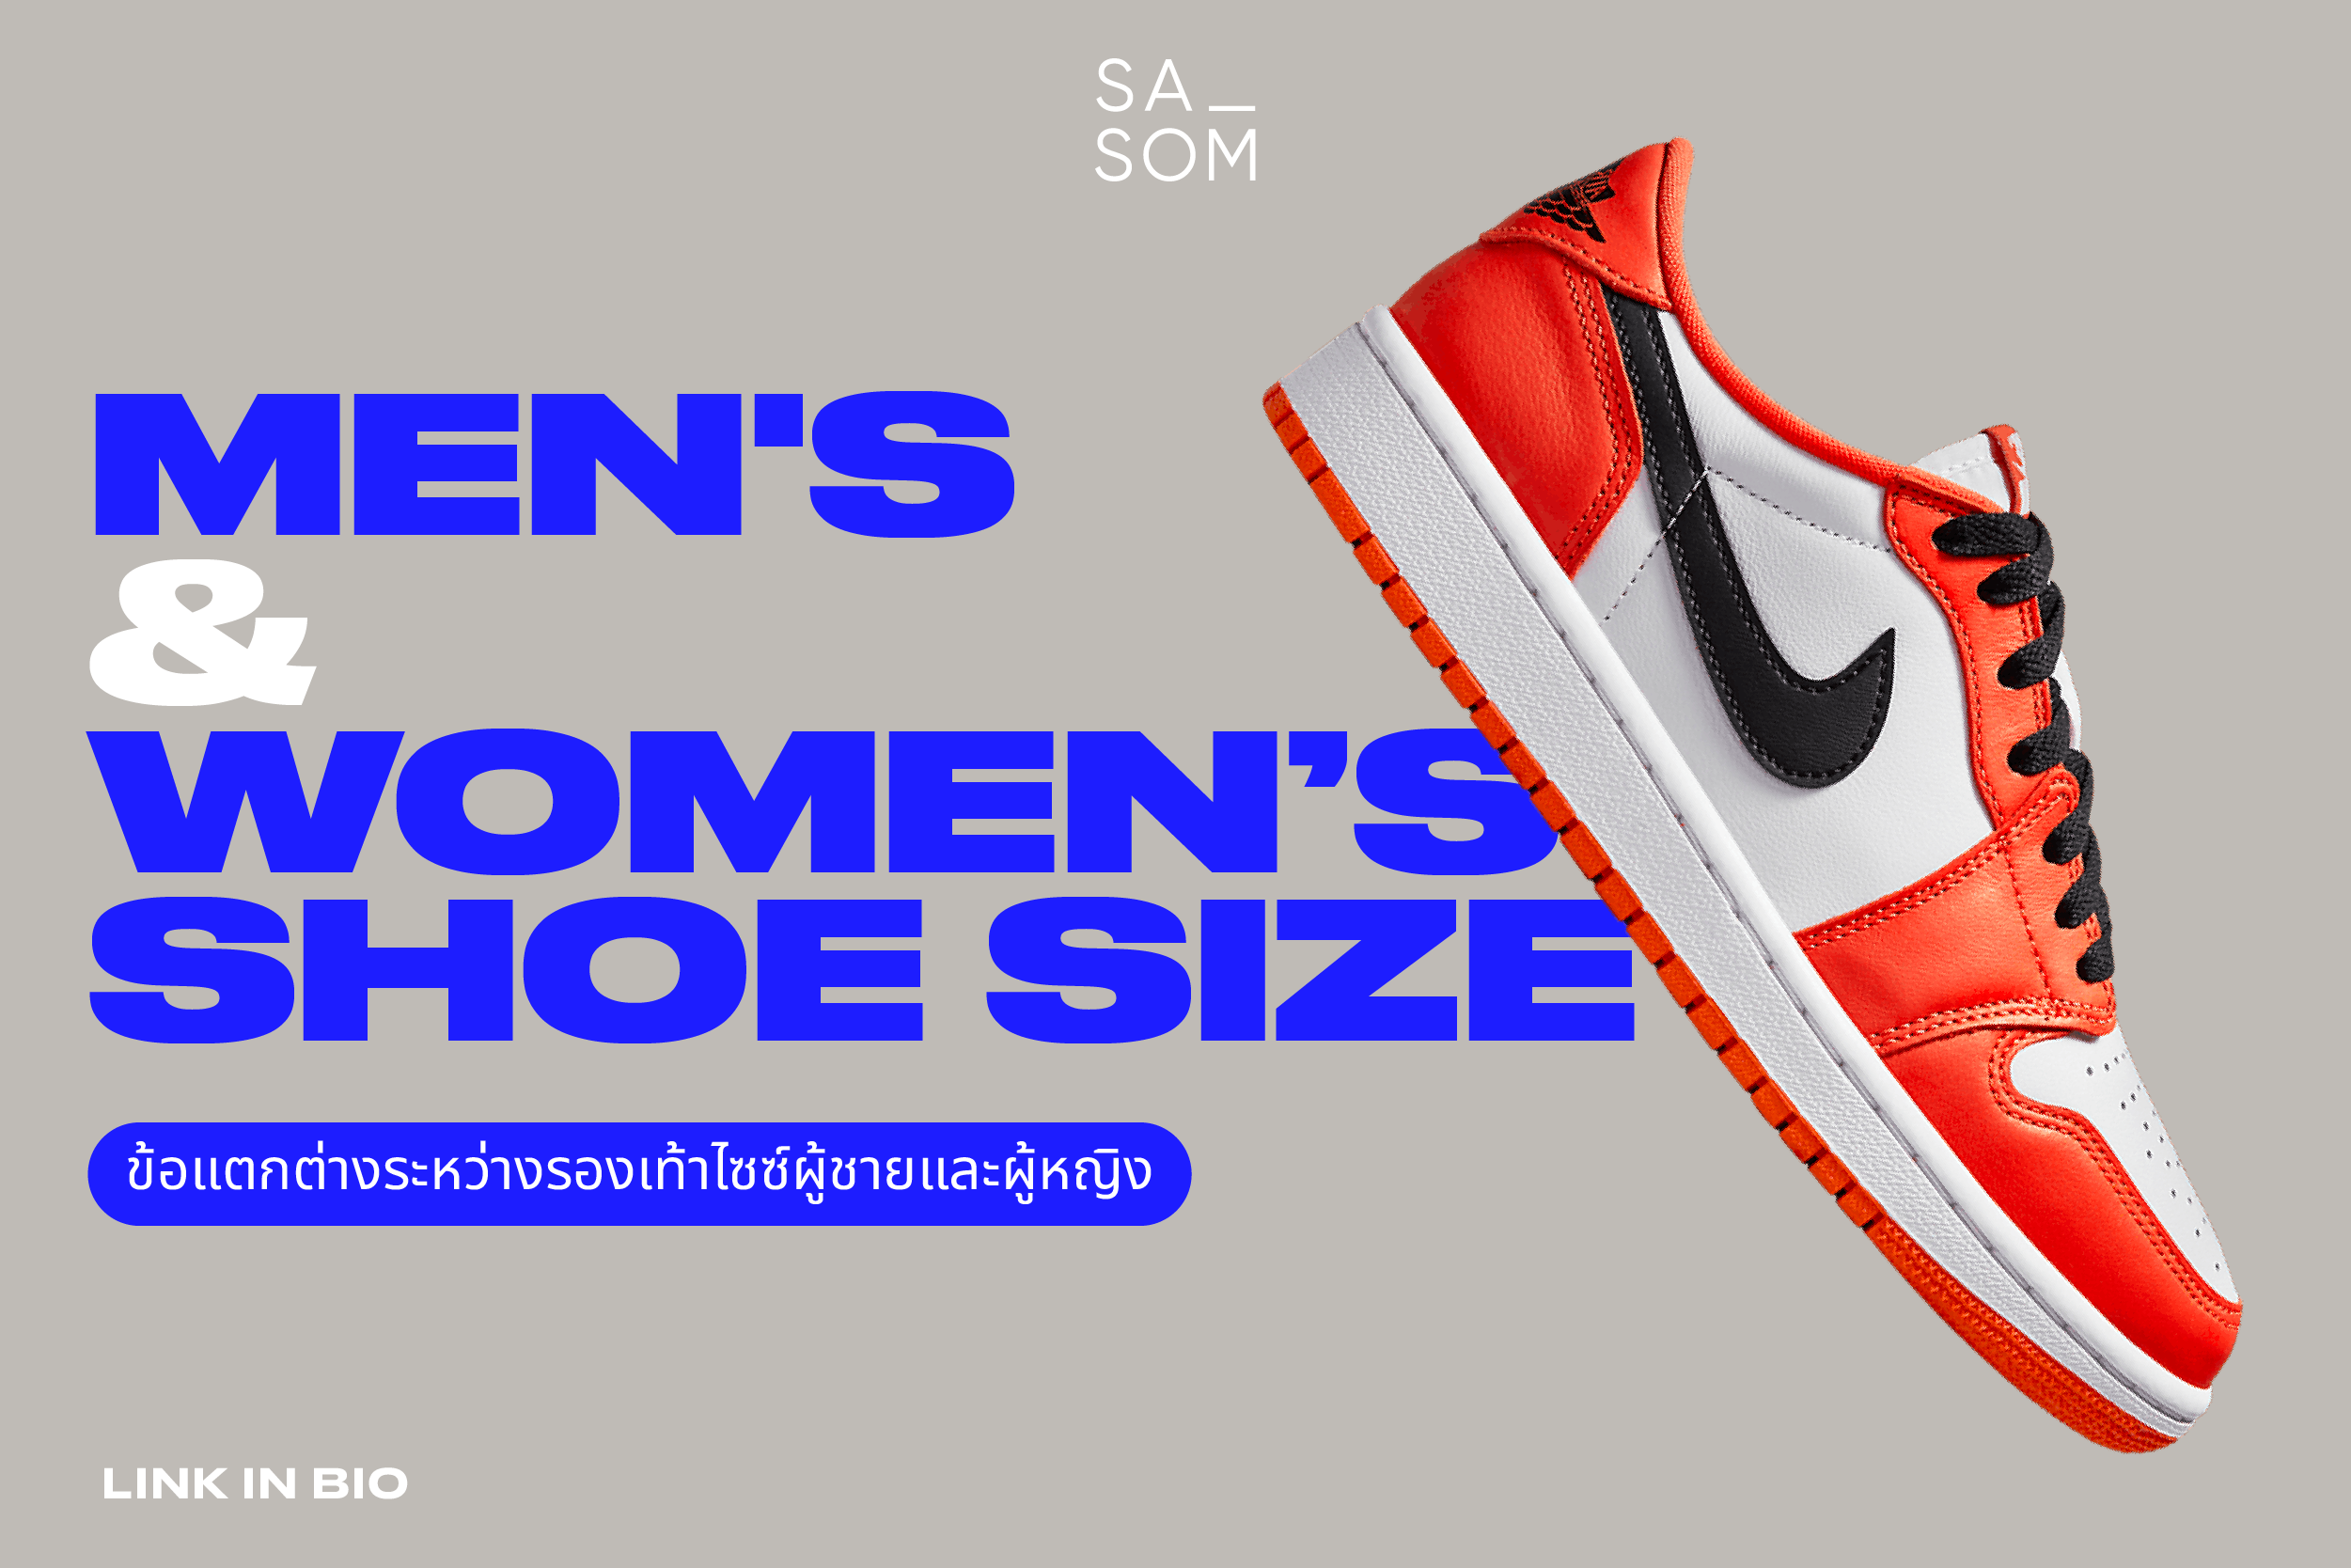 DIFFERENCE BETWEEN MEN'S AND WOMEN’S SHOE SIZE